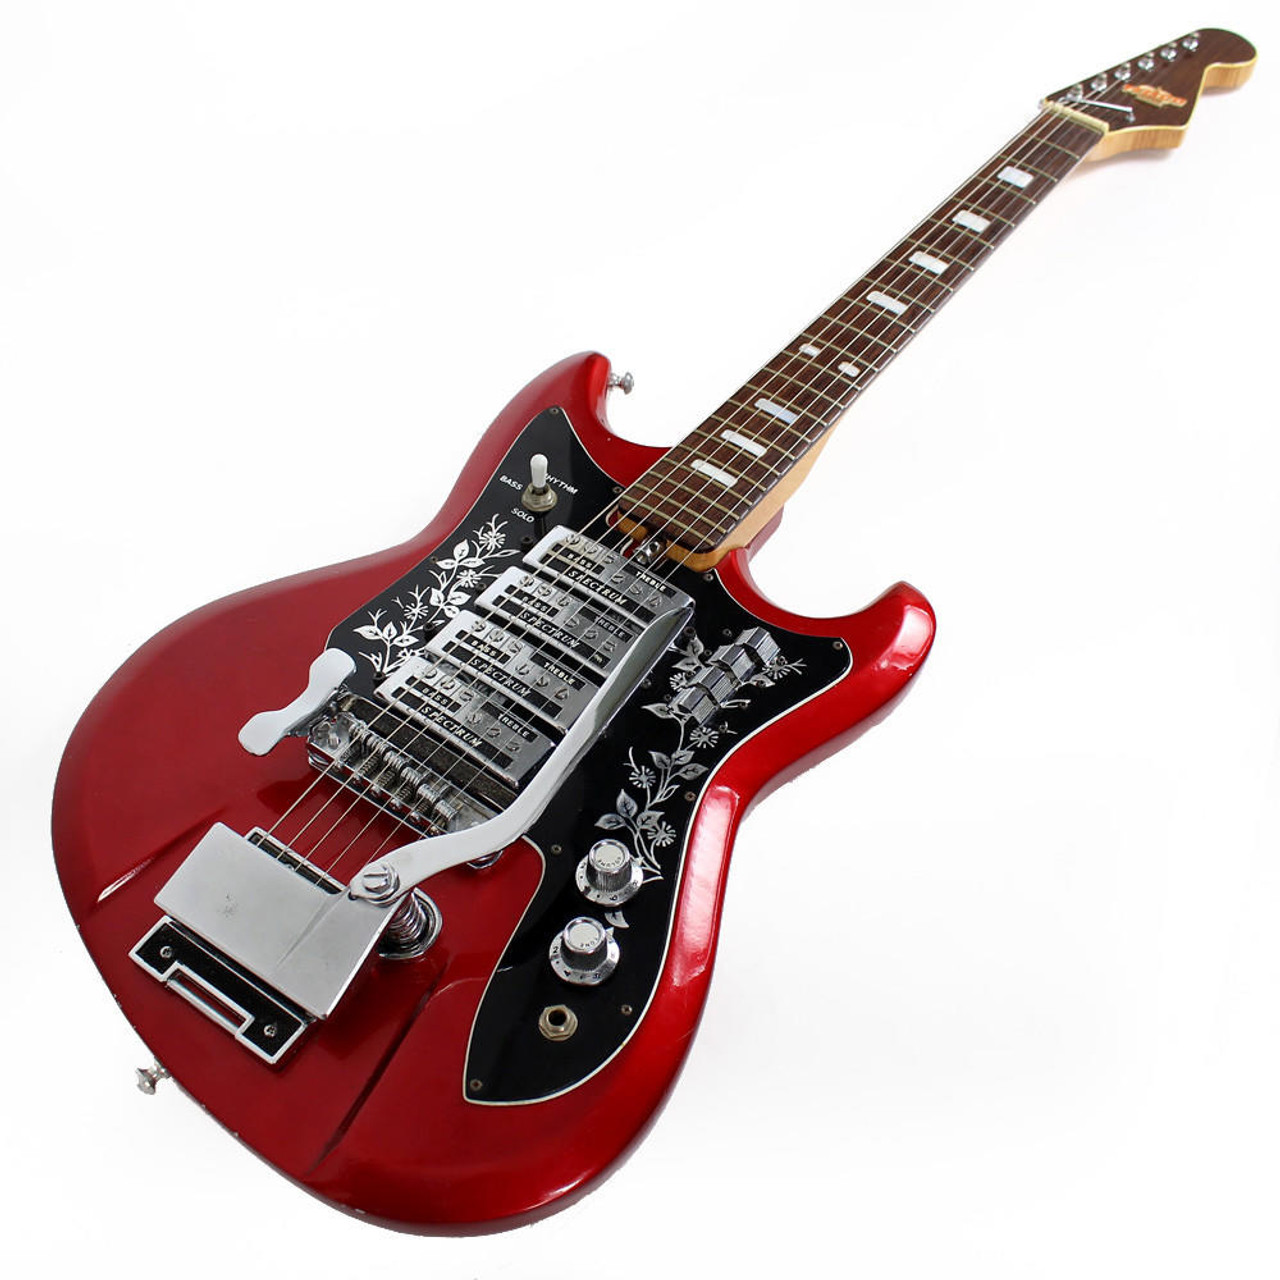 Vintage Teisco ET-440 Electric Guitar in Red